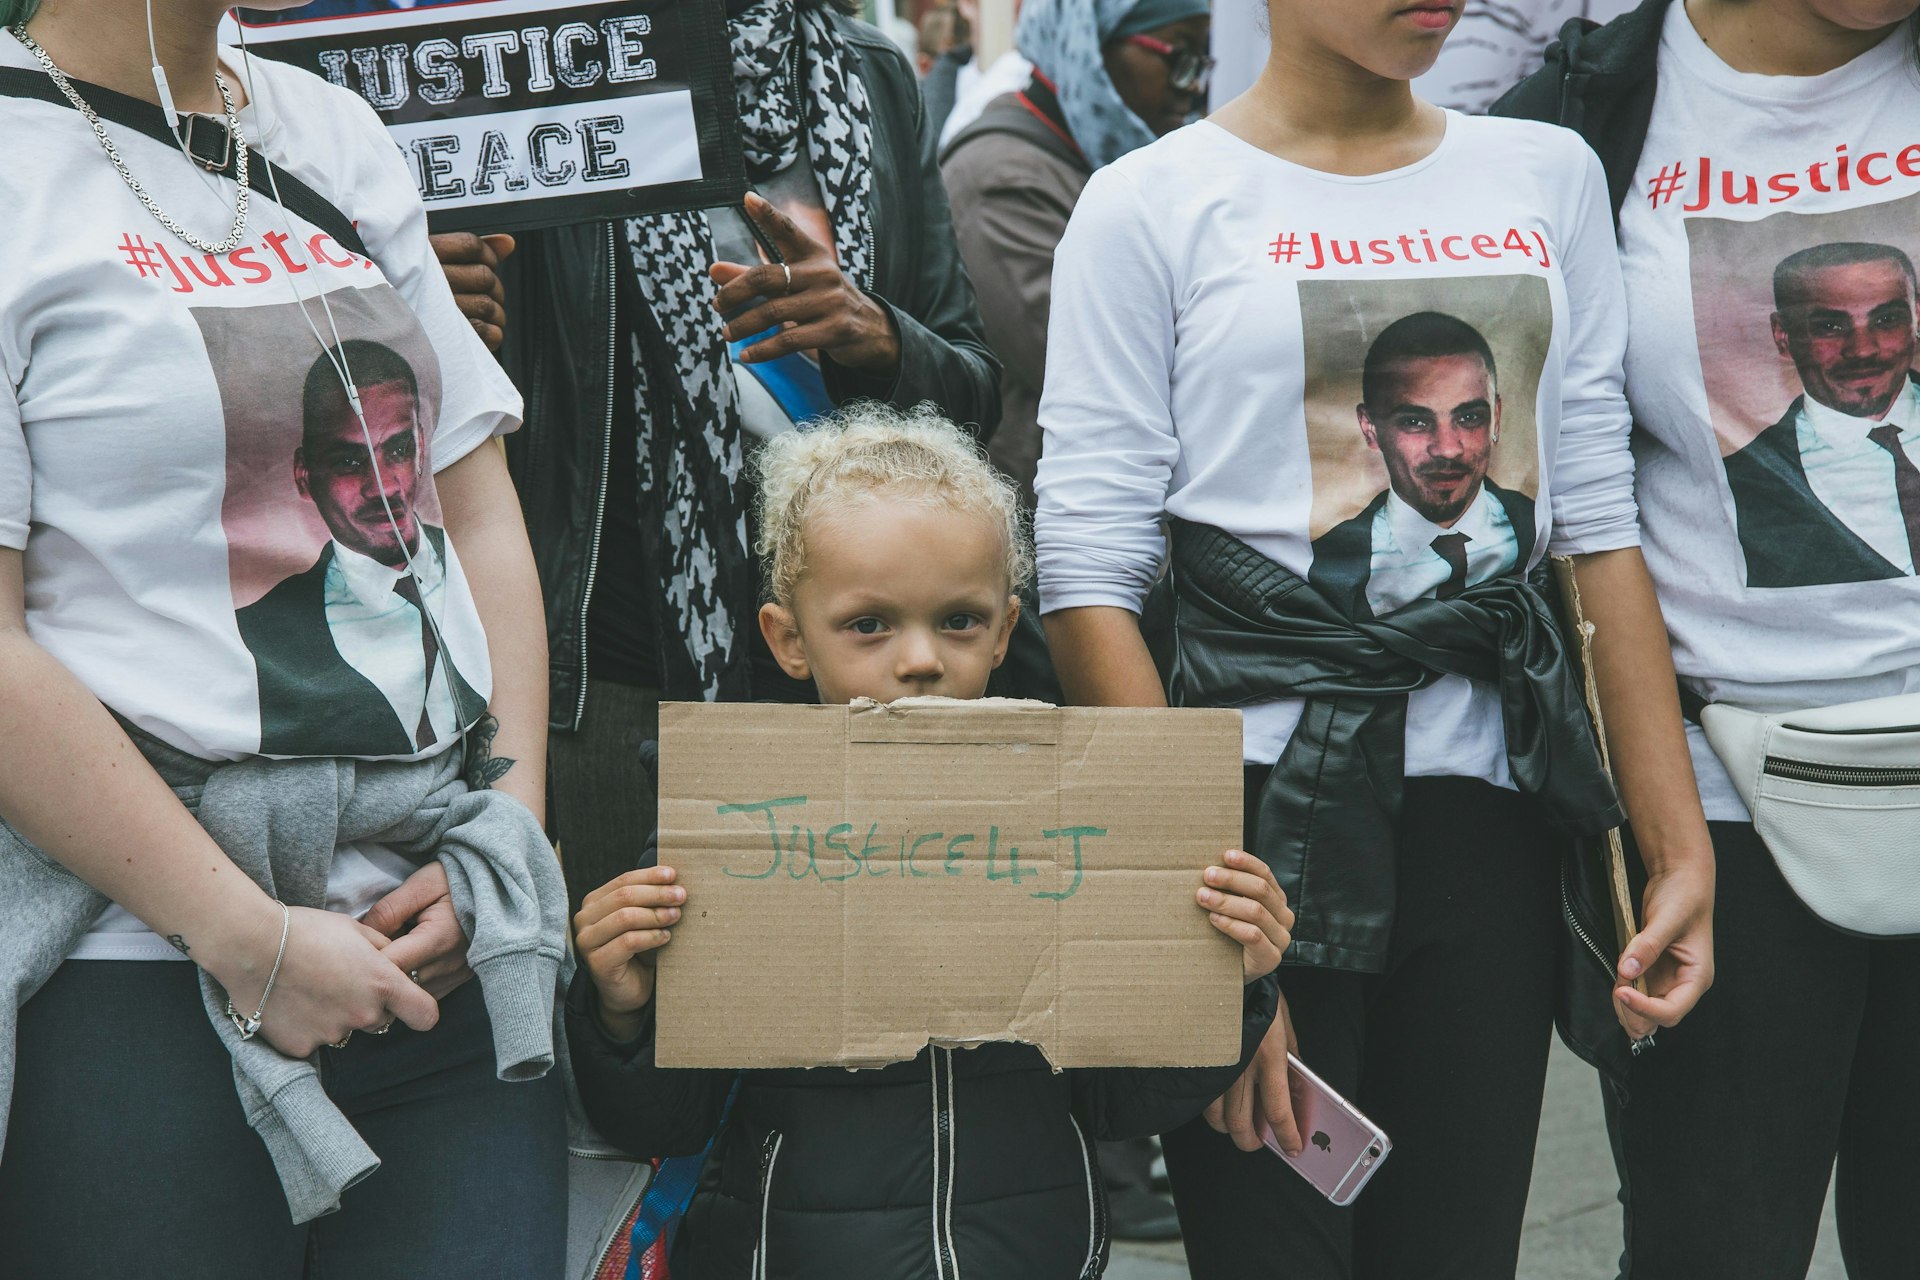 The families of those who've died in police custody are still demanding justice